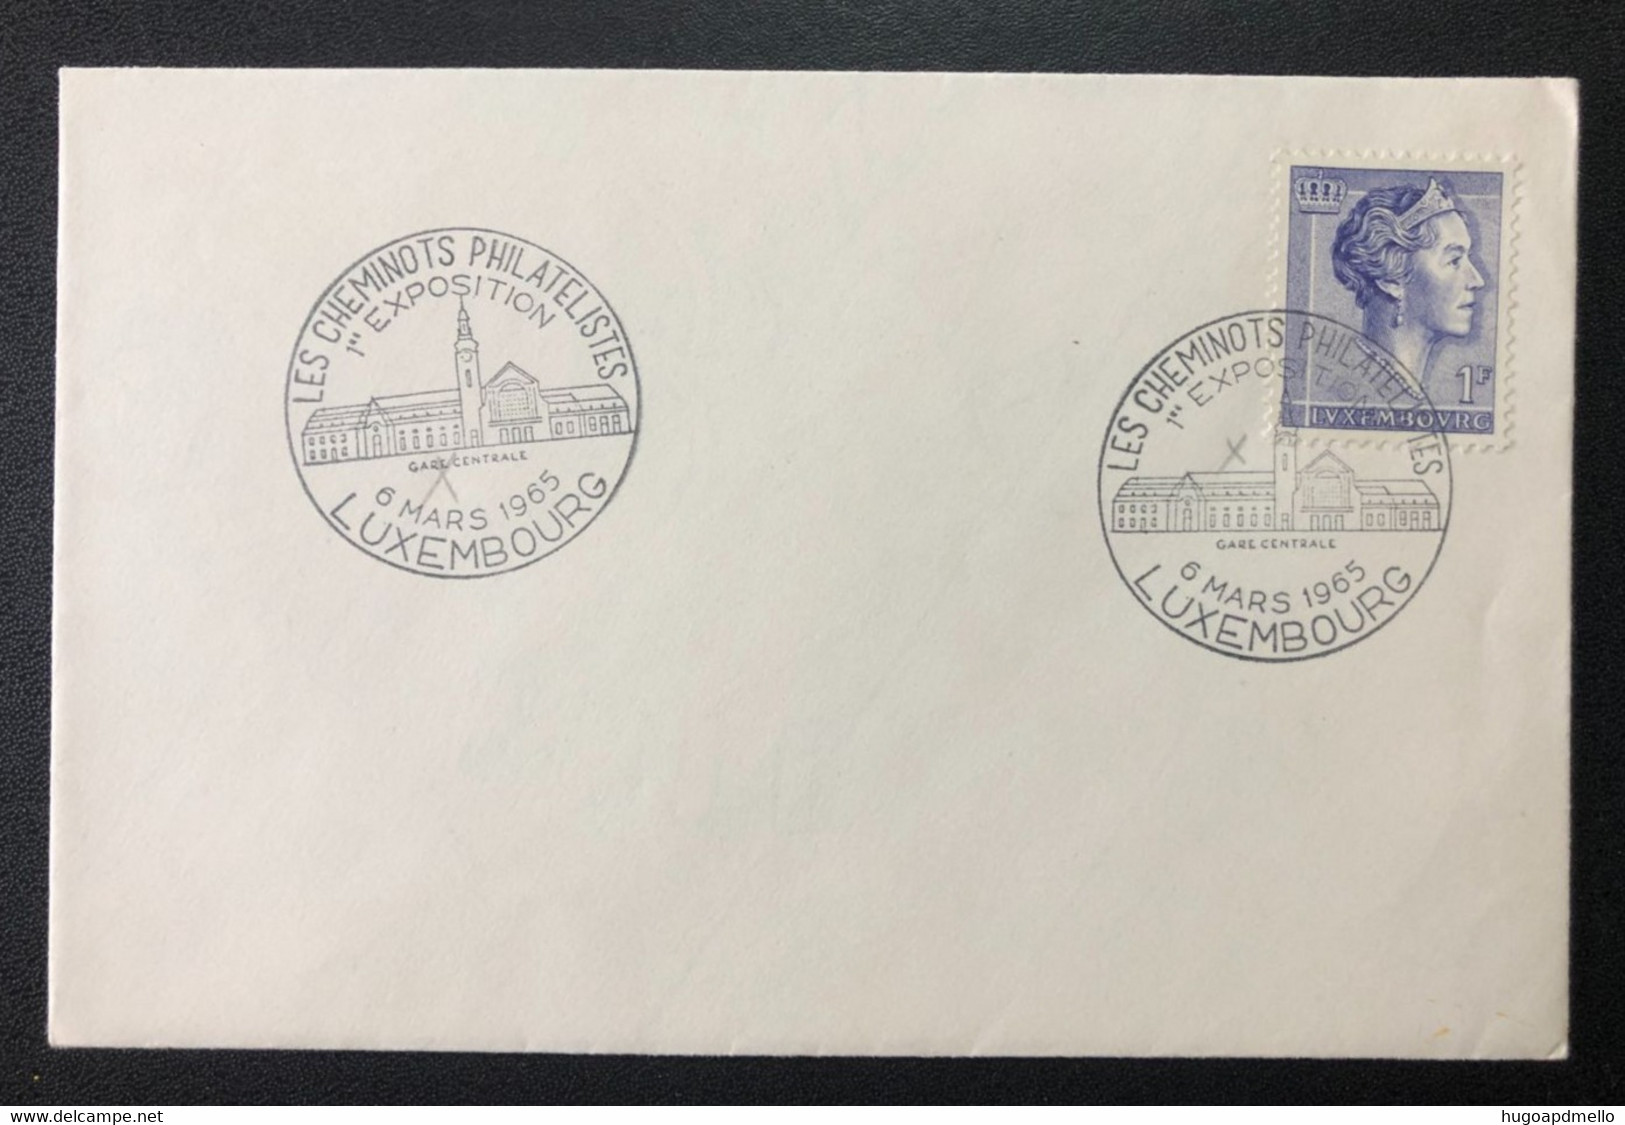 LUXEMBOURG, «1ère Exposition Les Cheminots Philatelistes »,  With Special Postmark, 1965 - Lettres & Documents